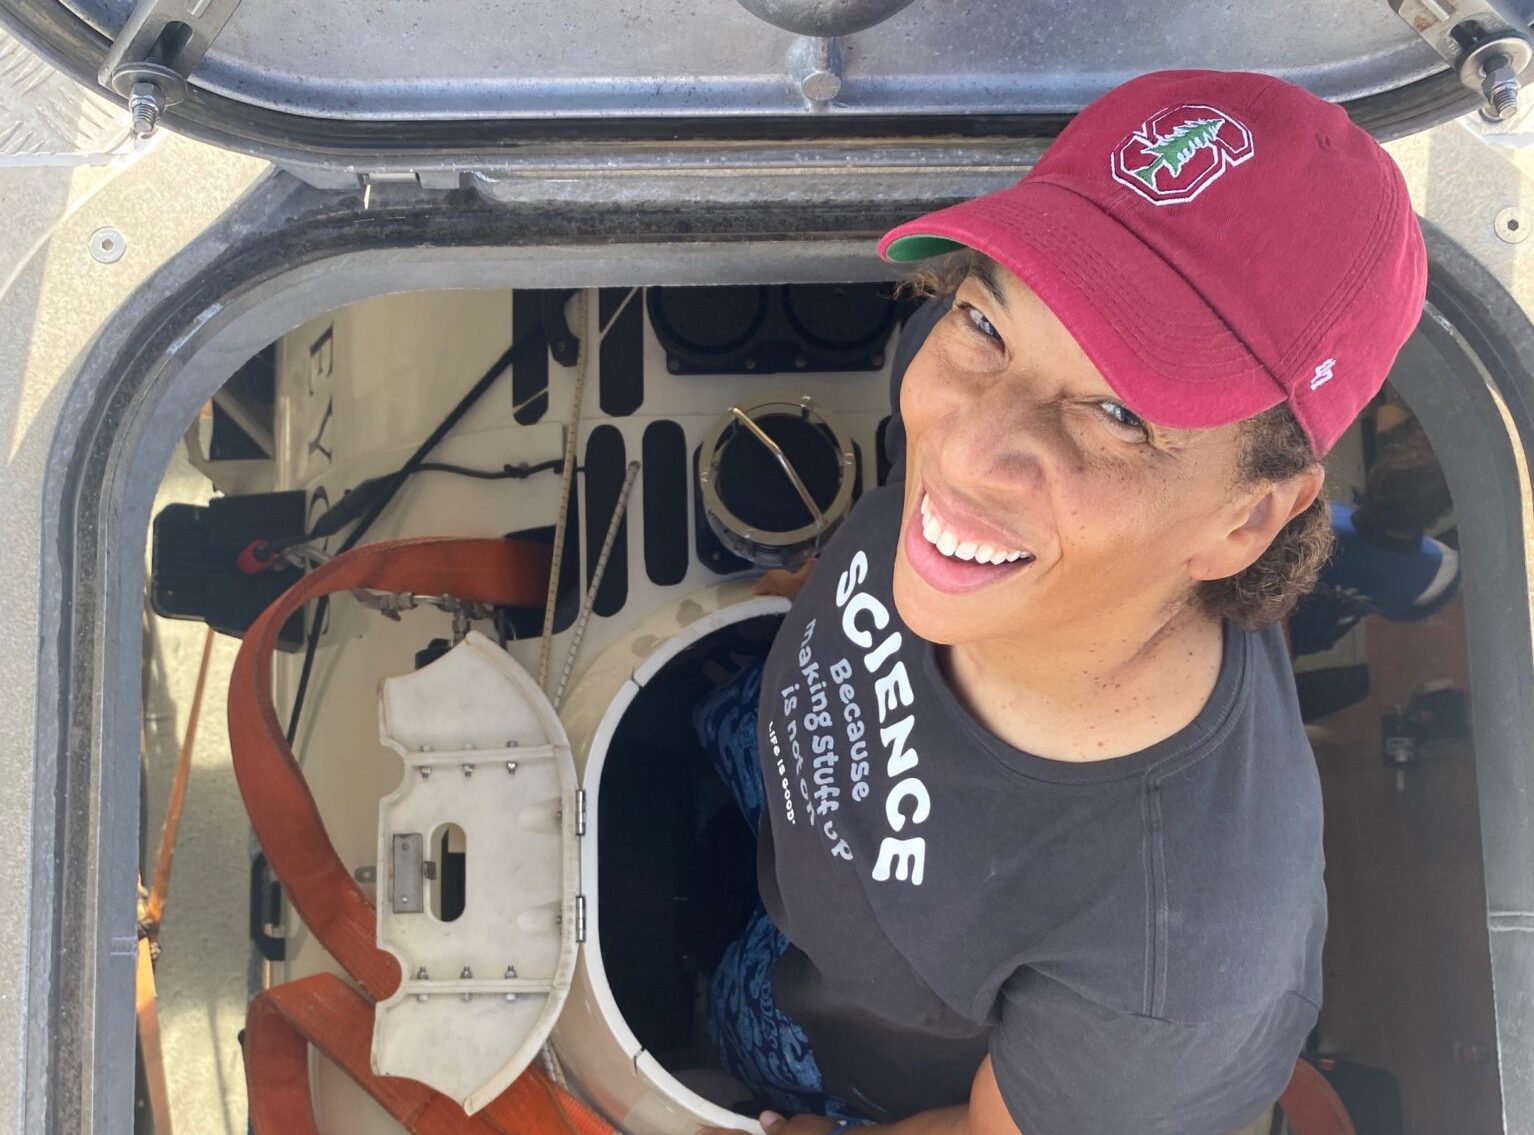 a black woman in a stanford baseball cap stands in the hatch of a submersible about to load